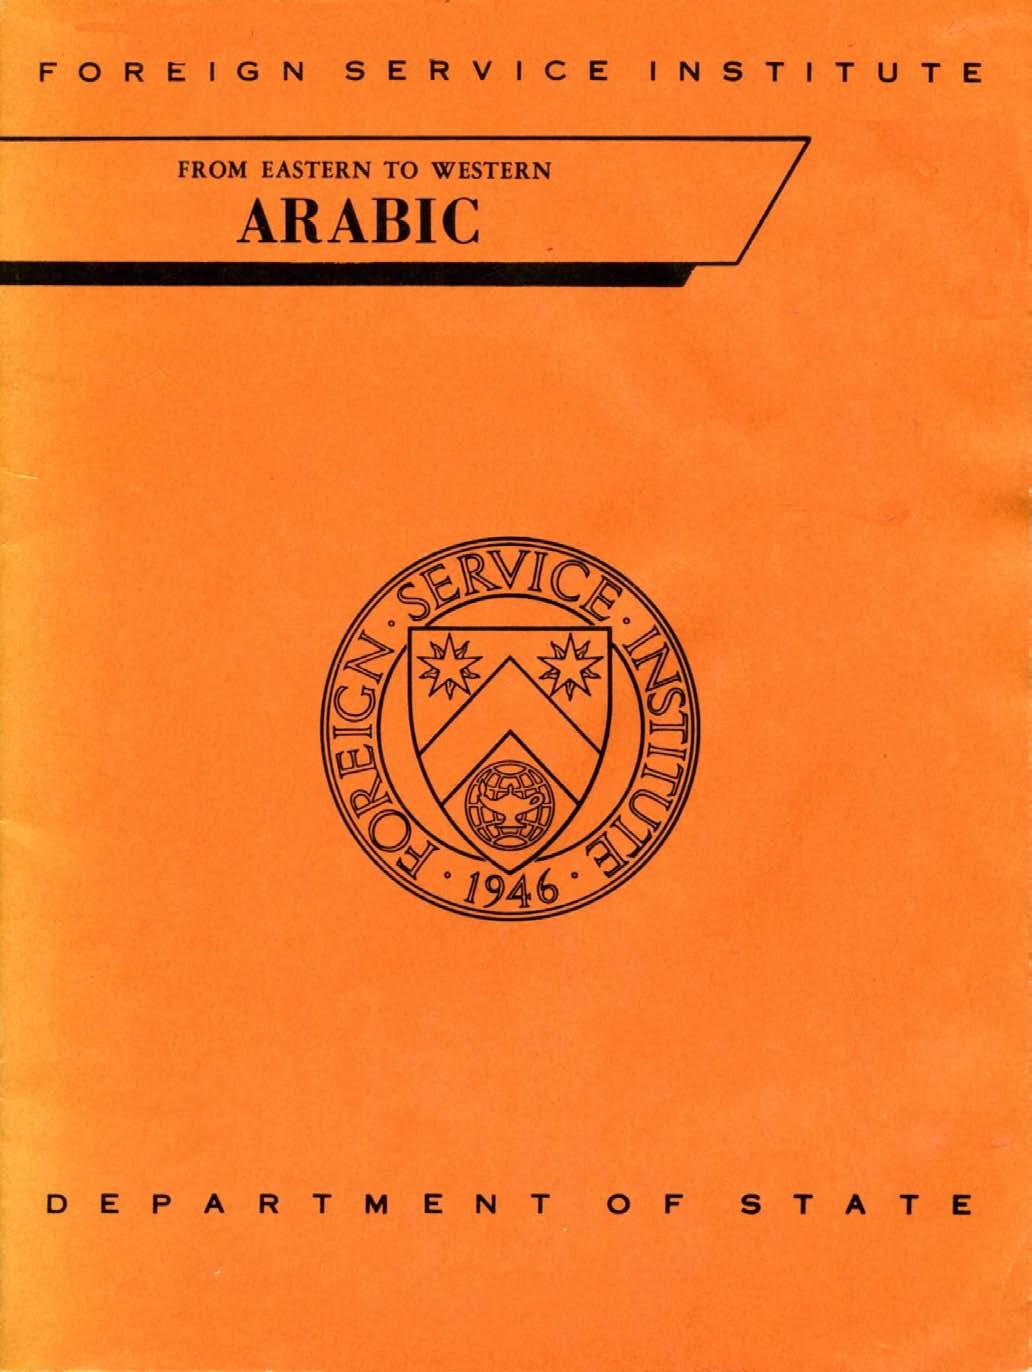 From Eastern to Western Arabic. by coll